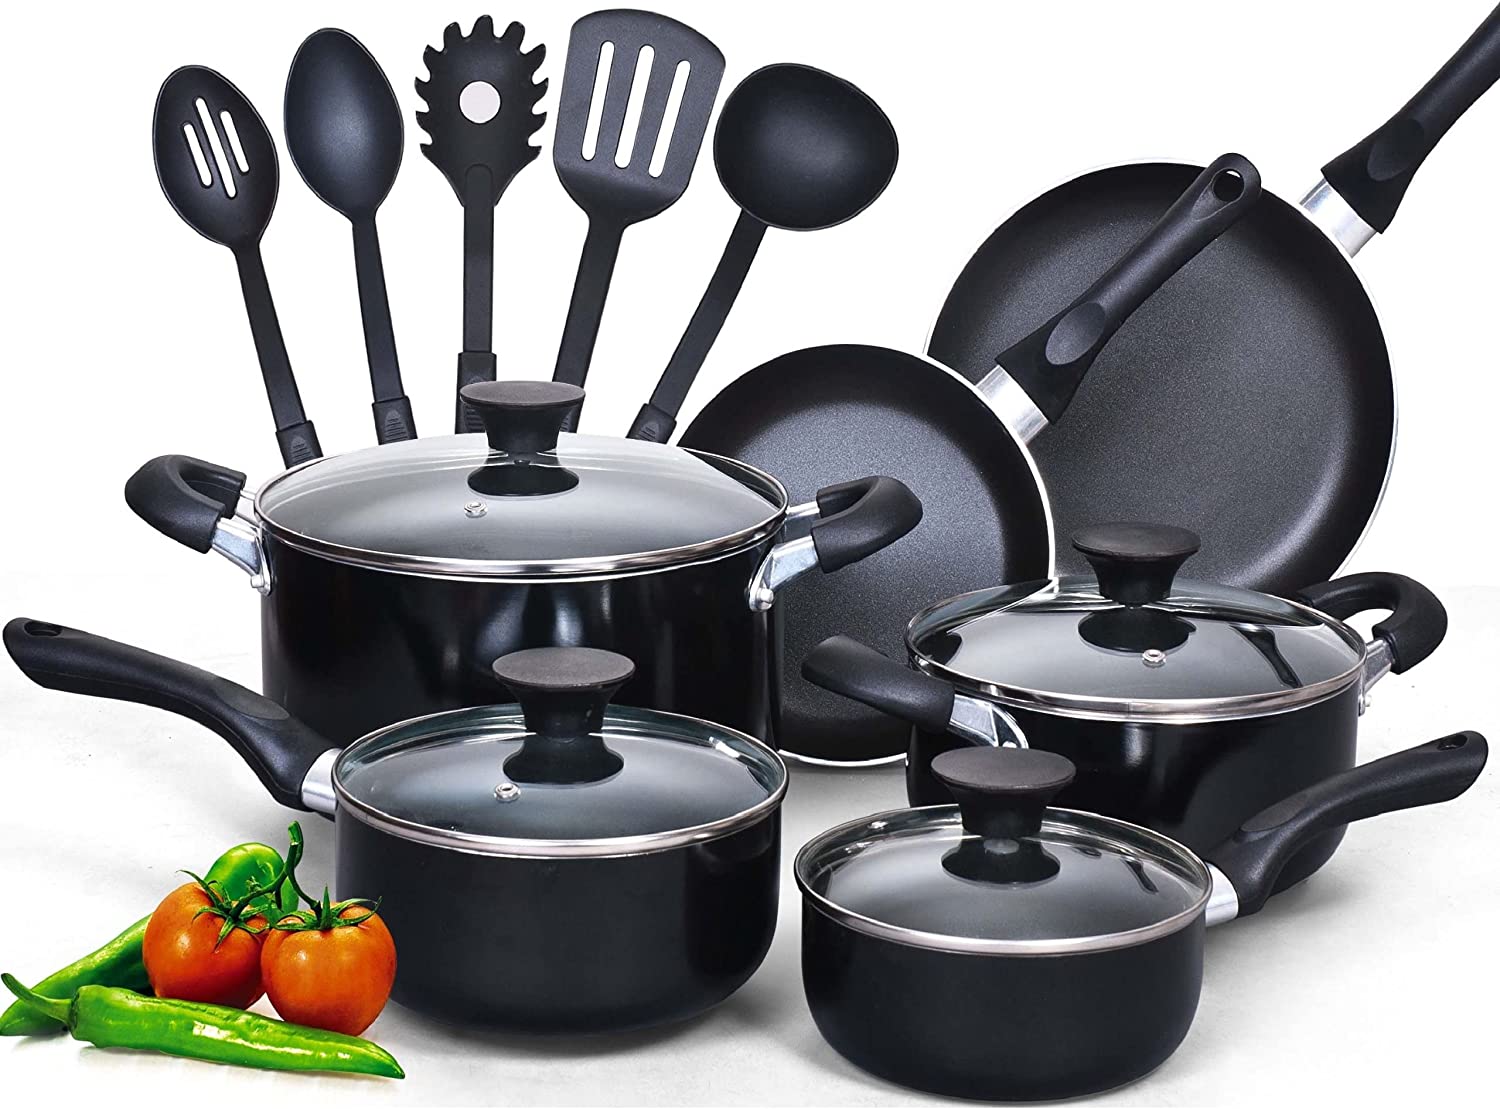  Cook N Home Pots and Pans Nonstick Cooking Set